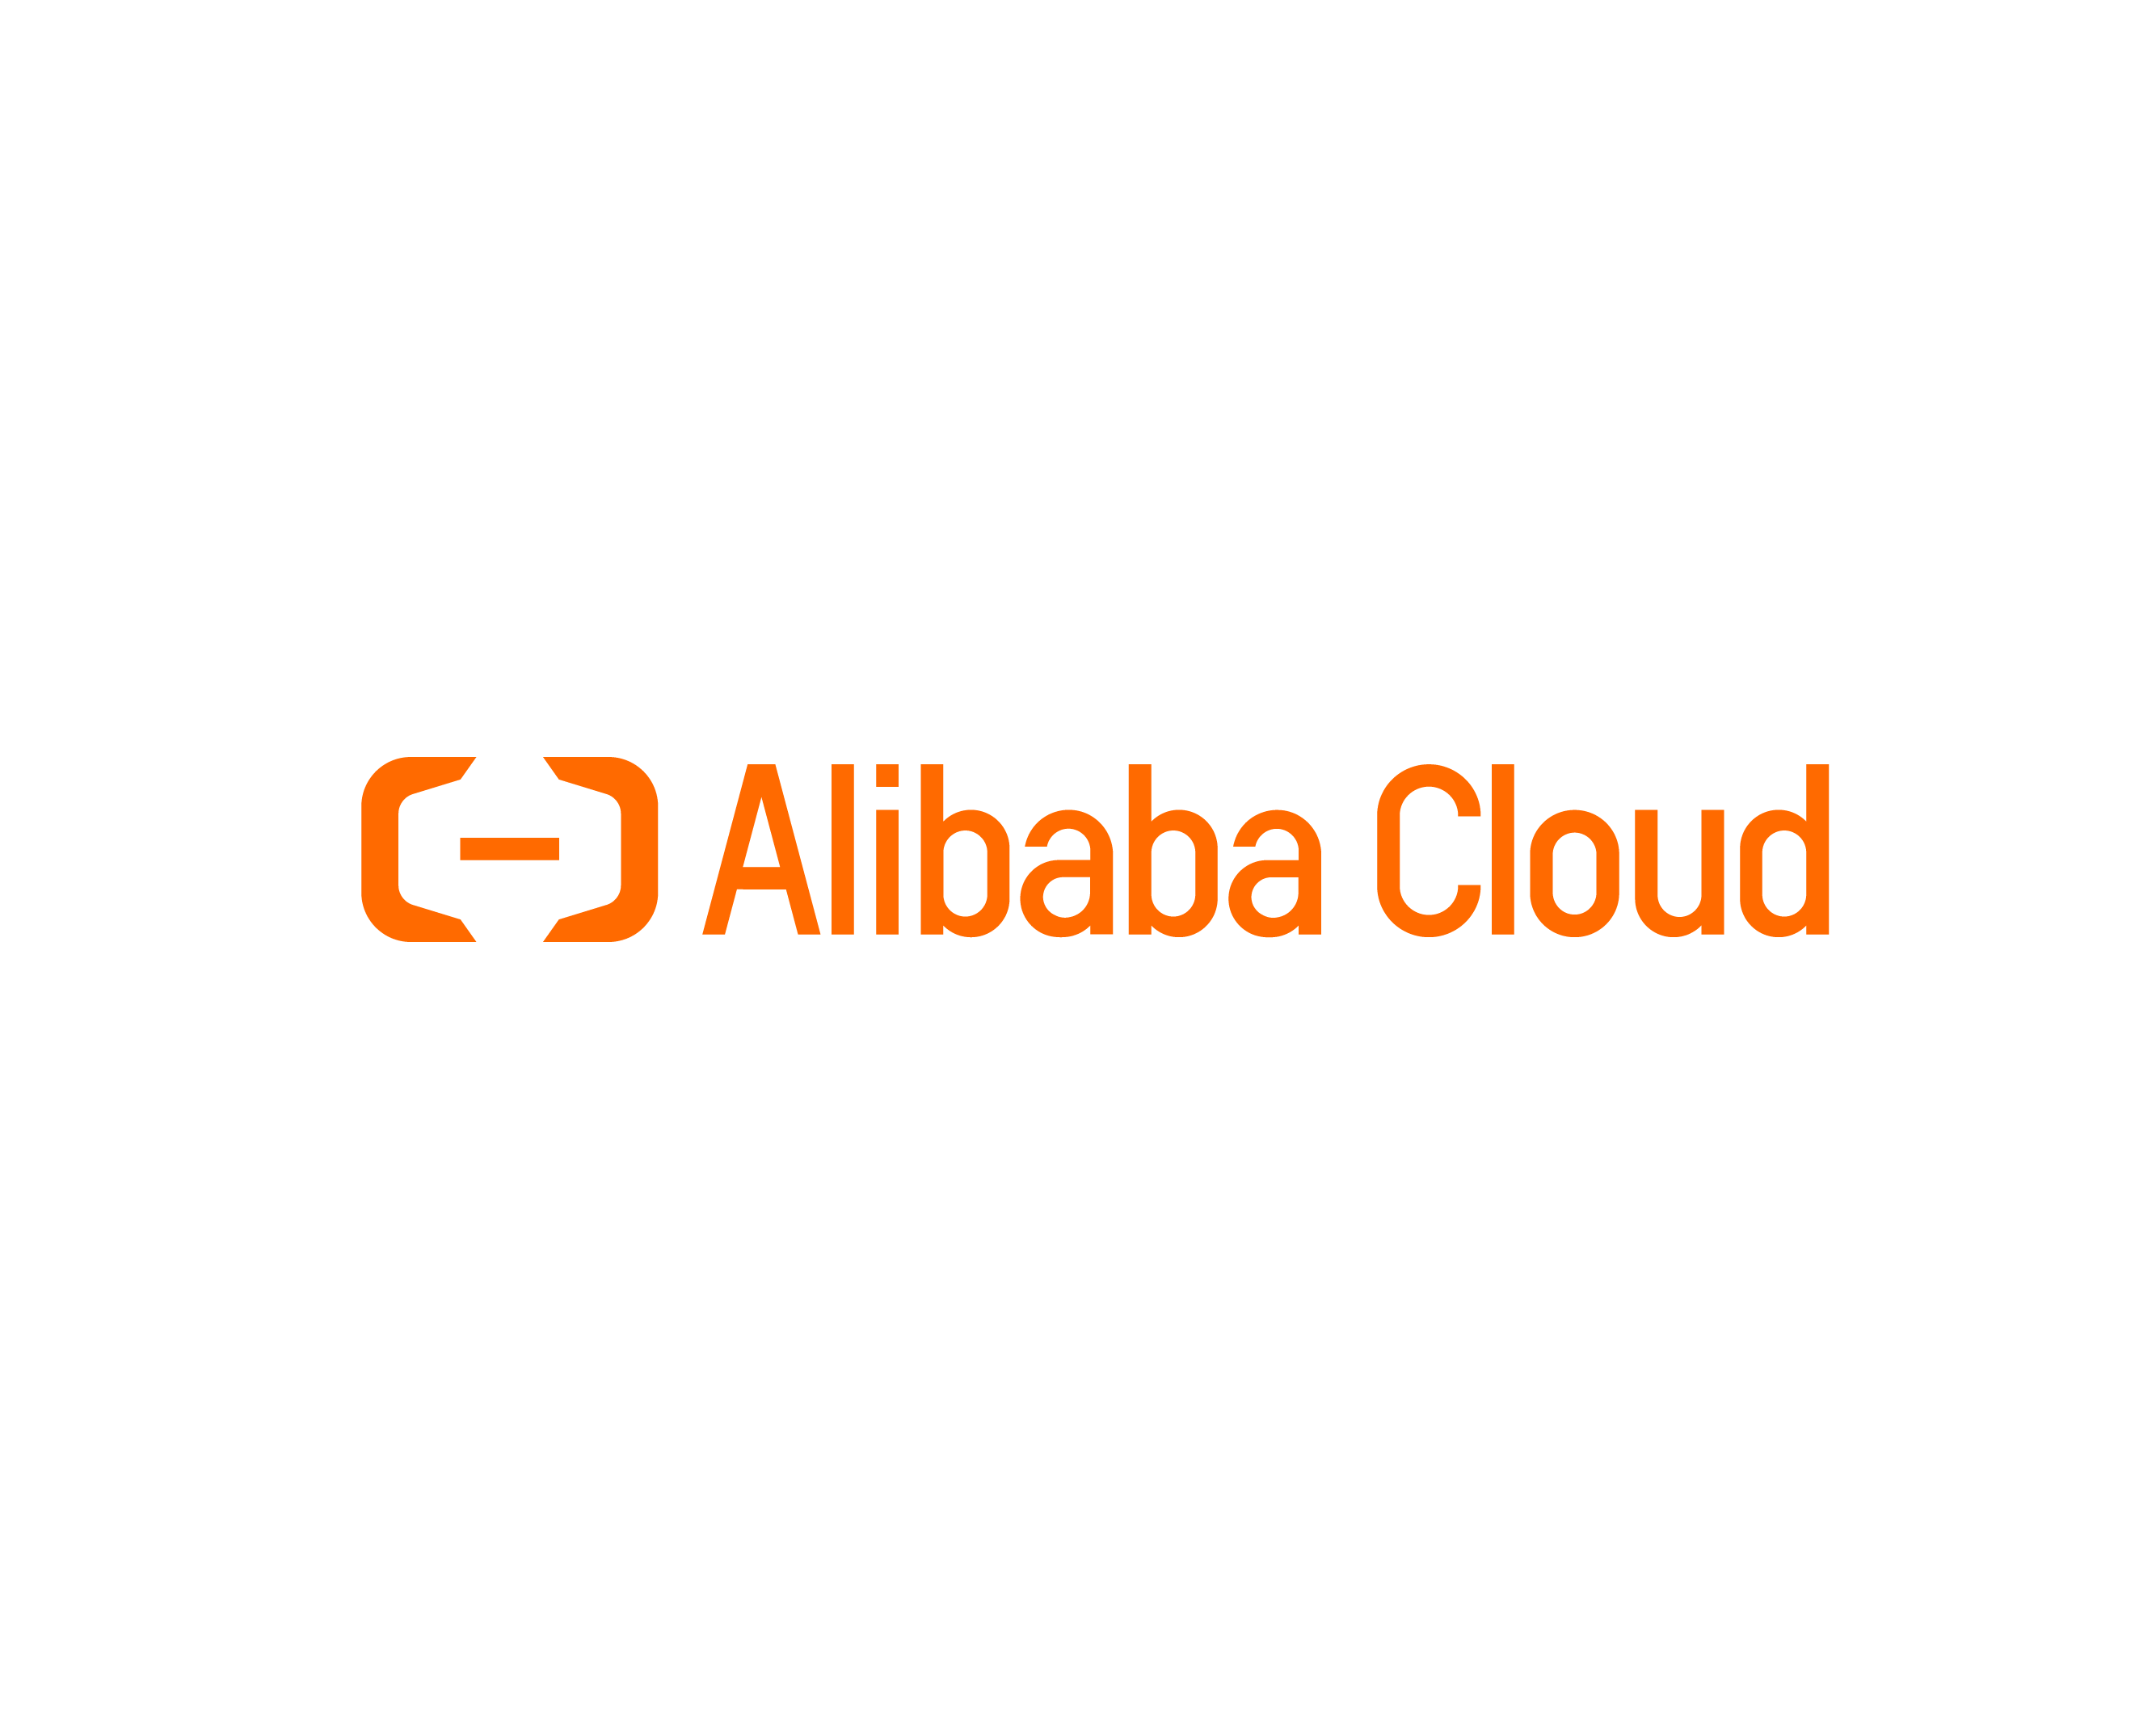 A Continuous Journey of Digital Transformation - Alibaba Cloud and Its Global Customers at Apsara 2020